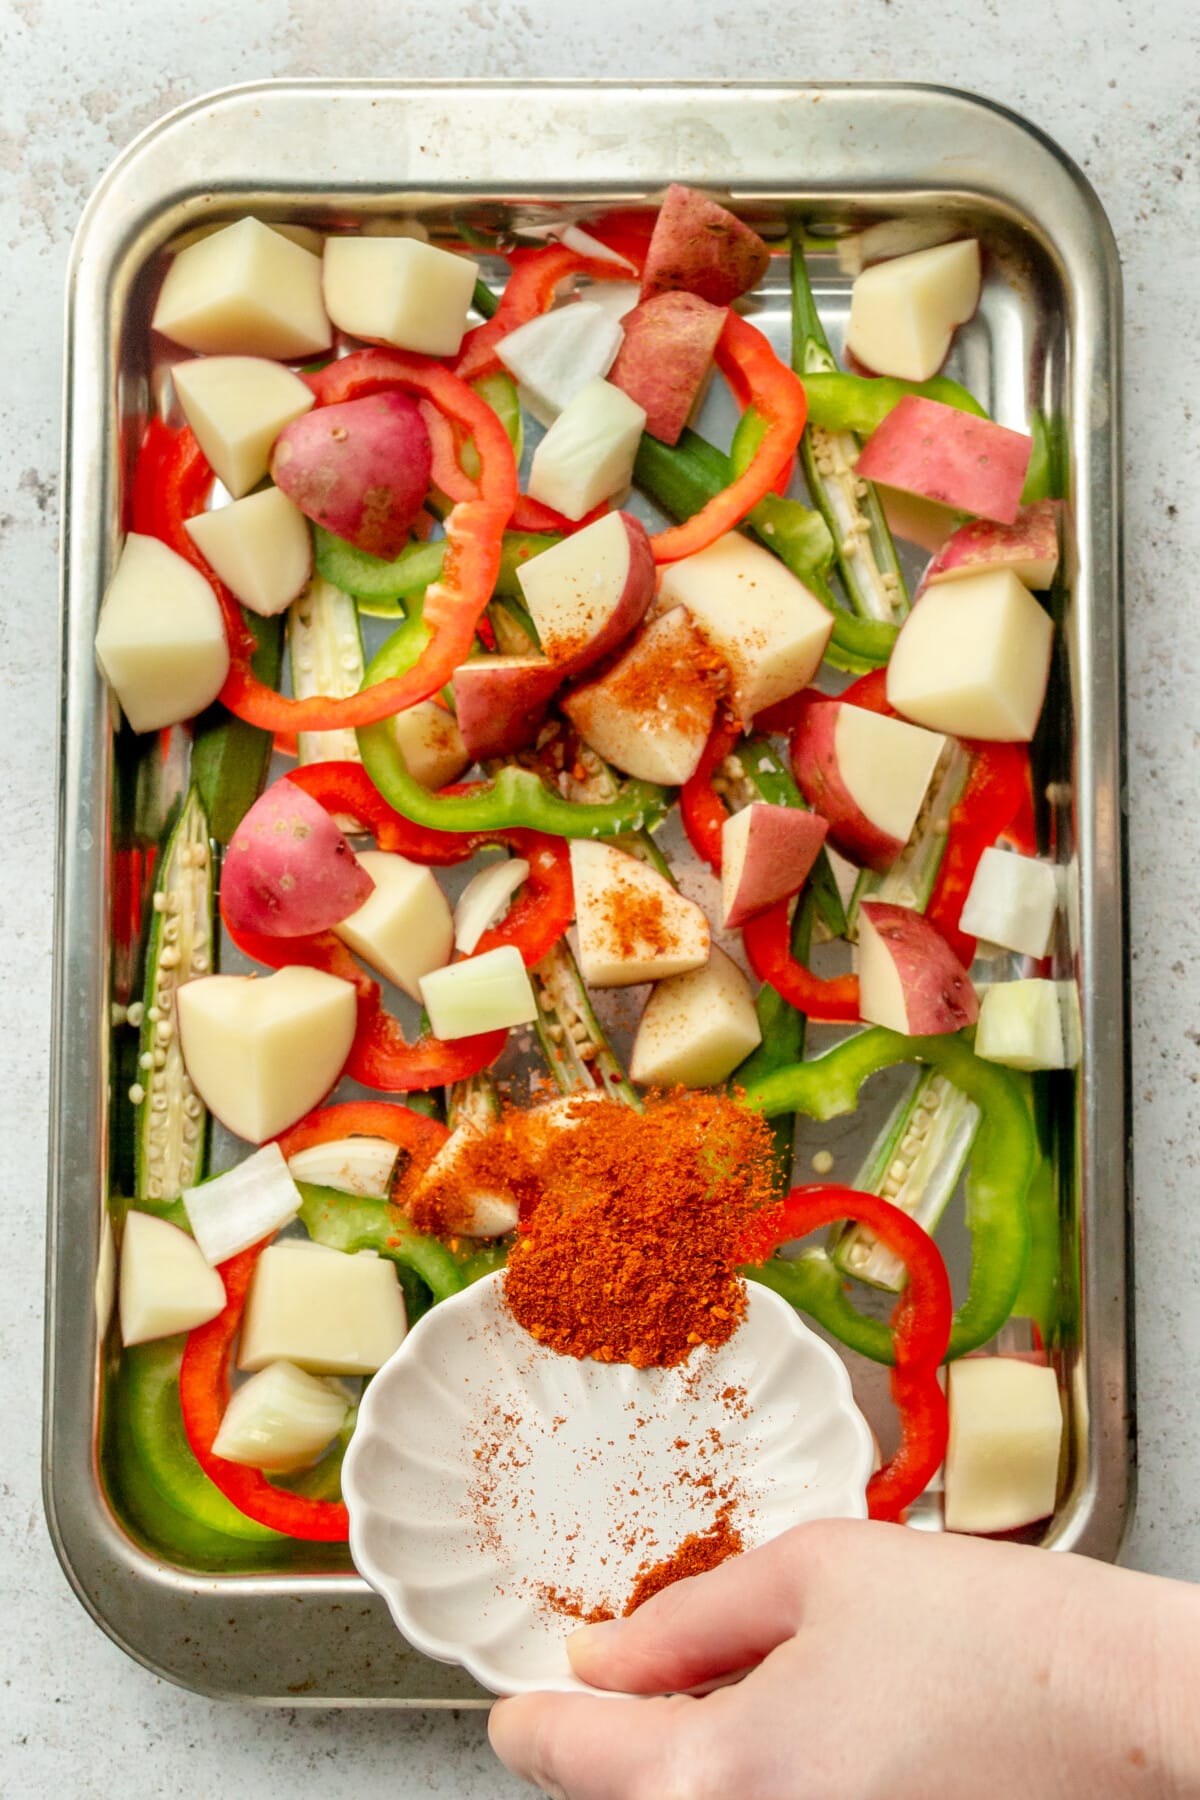 Cajun seasoning is tossed over cut vegetables sitting on a stainless steel rimmed baking sheet on a light grey surface.